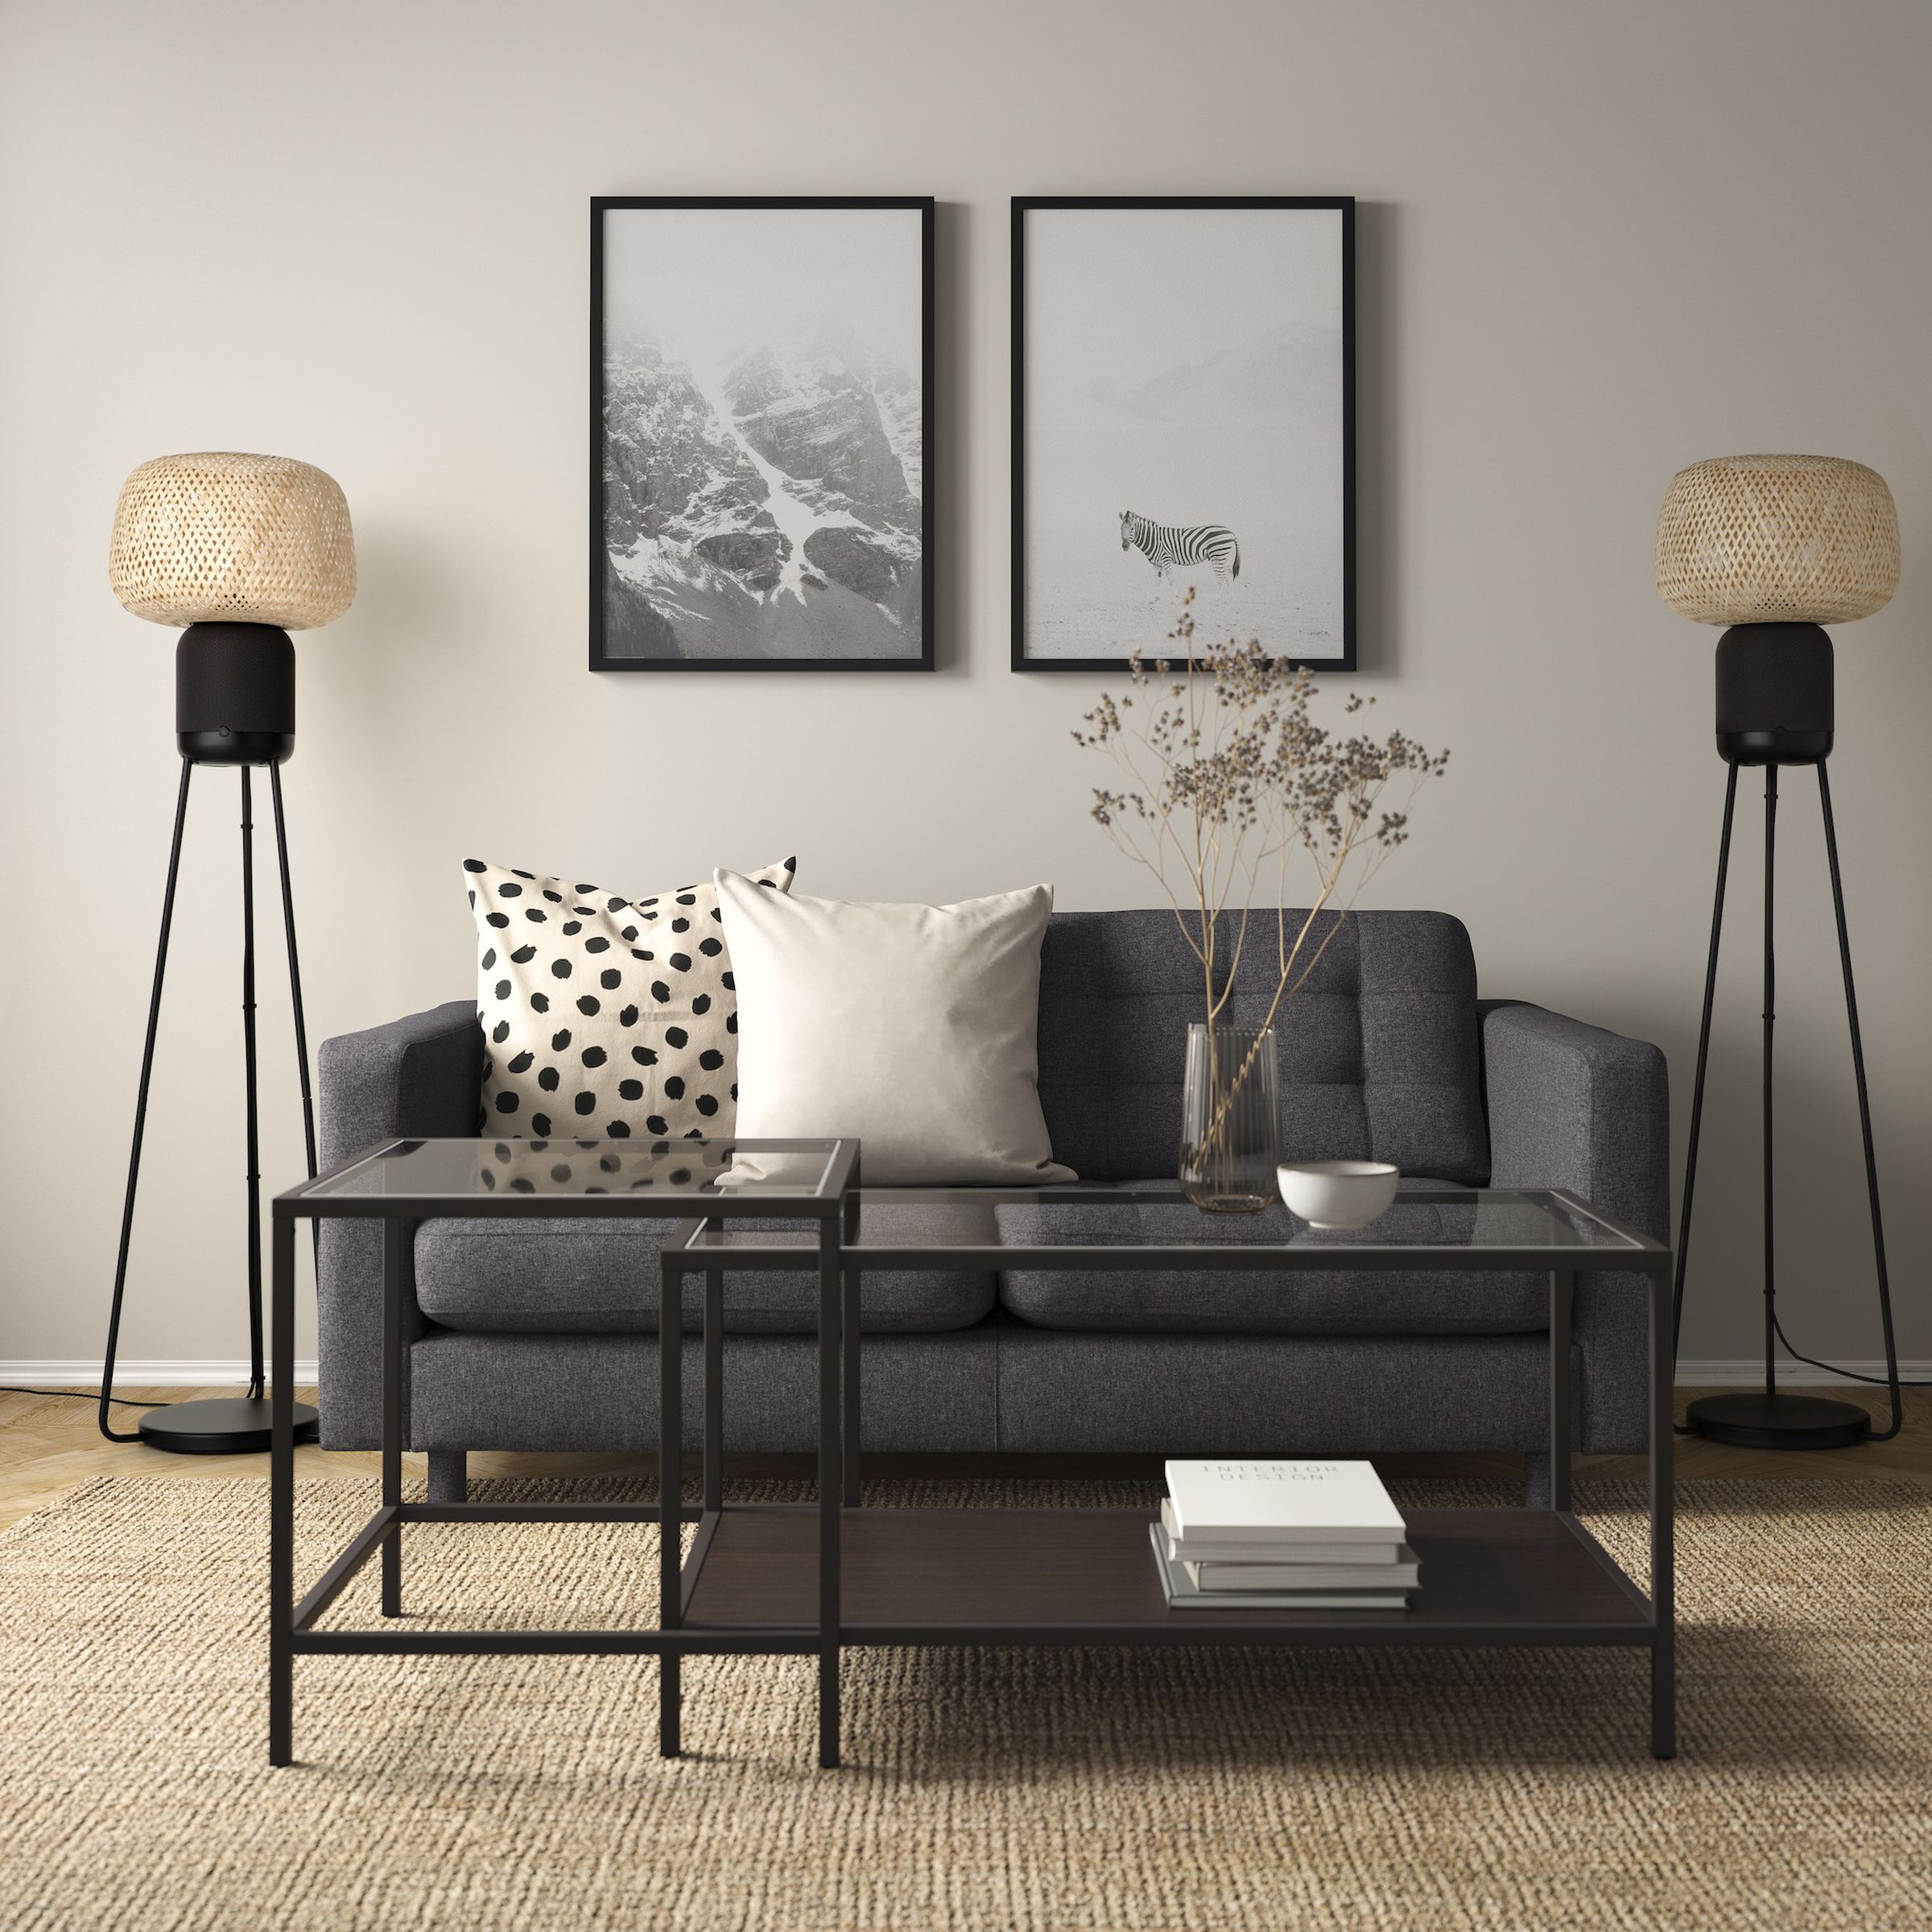 An image of two Symfonisk floor lamp speakers, one on either side of a sofa.